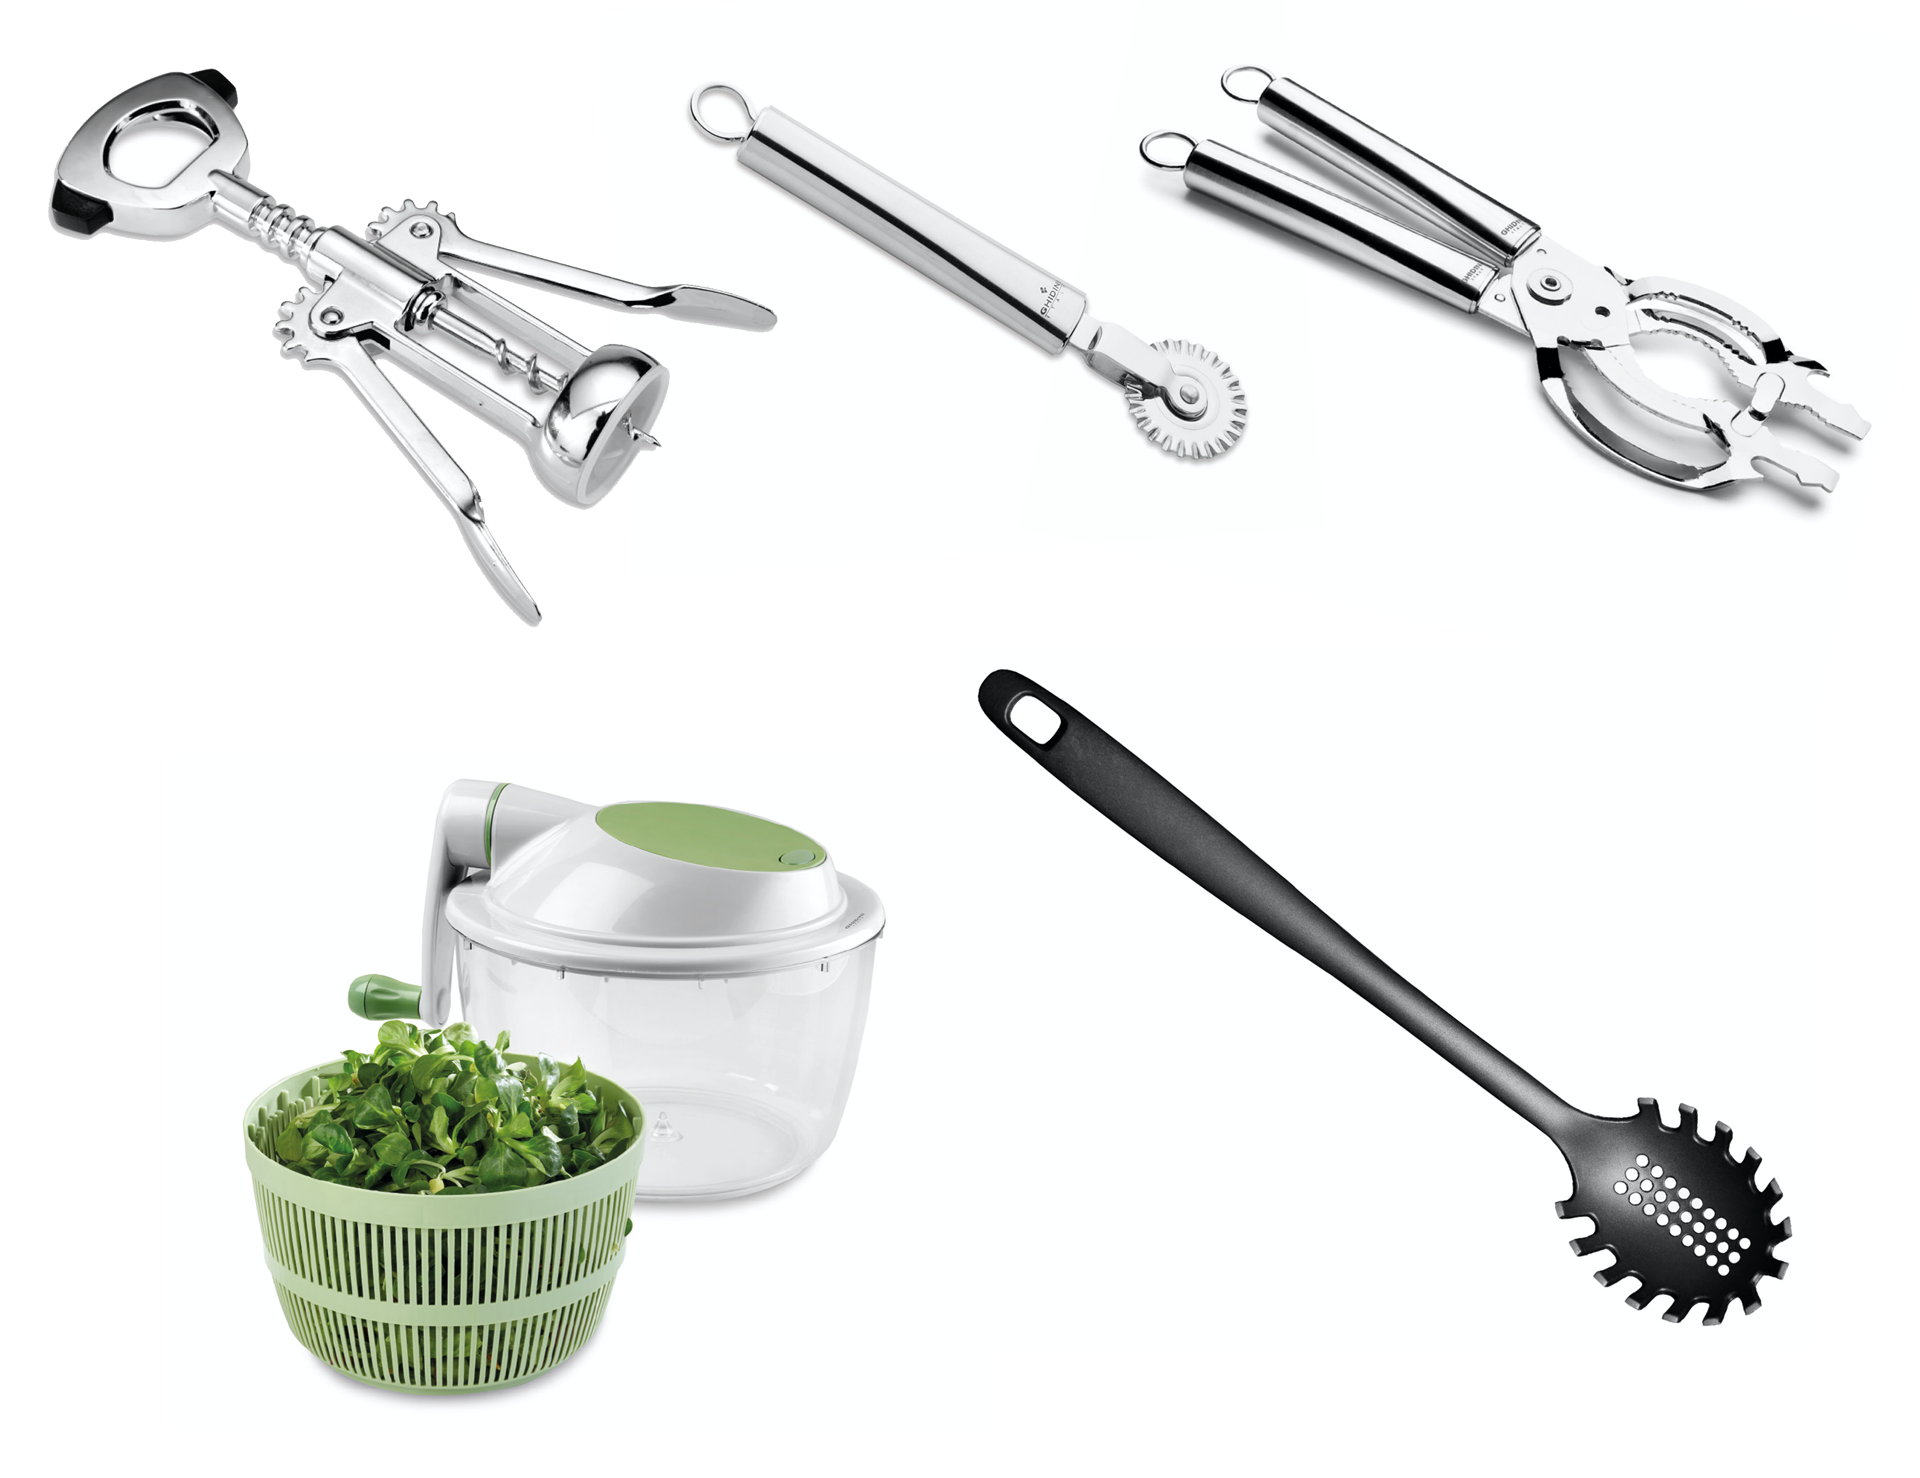 Ghidini kitchen utensils - cooking products made in Italy